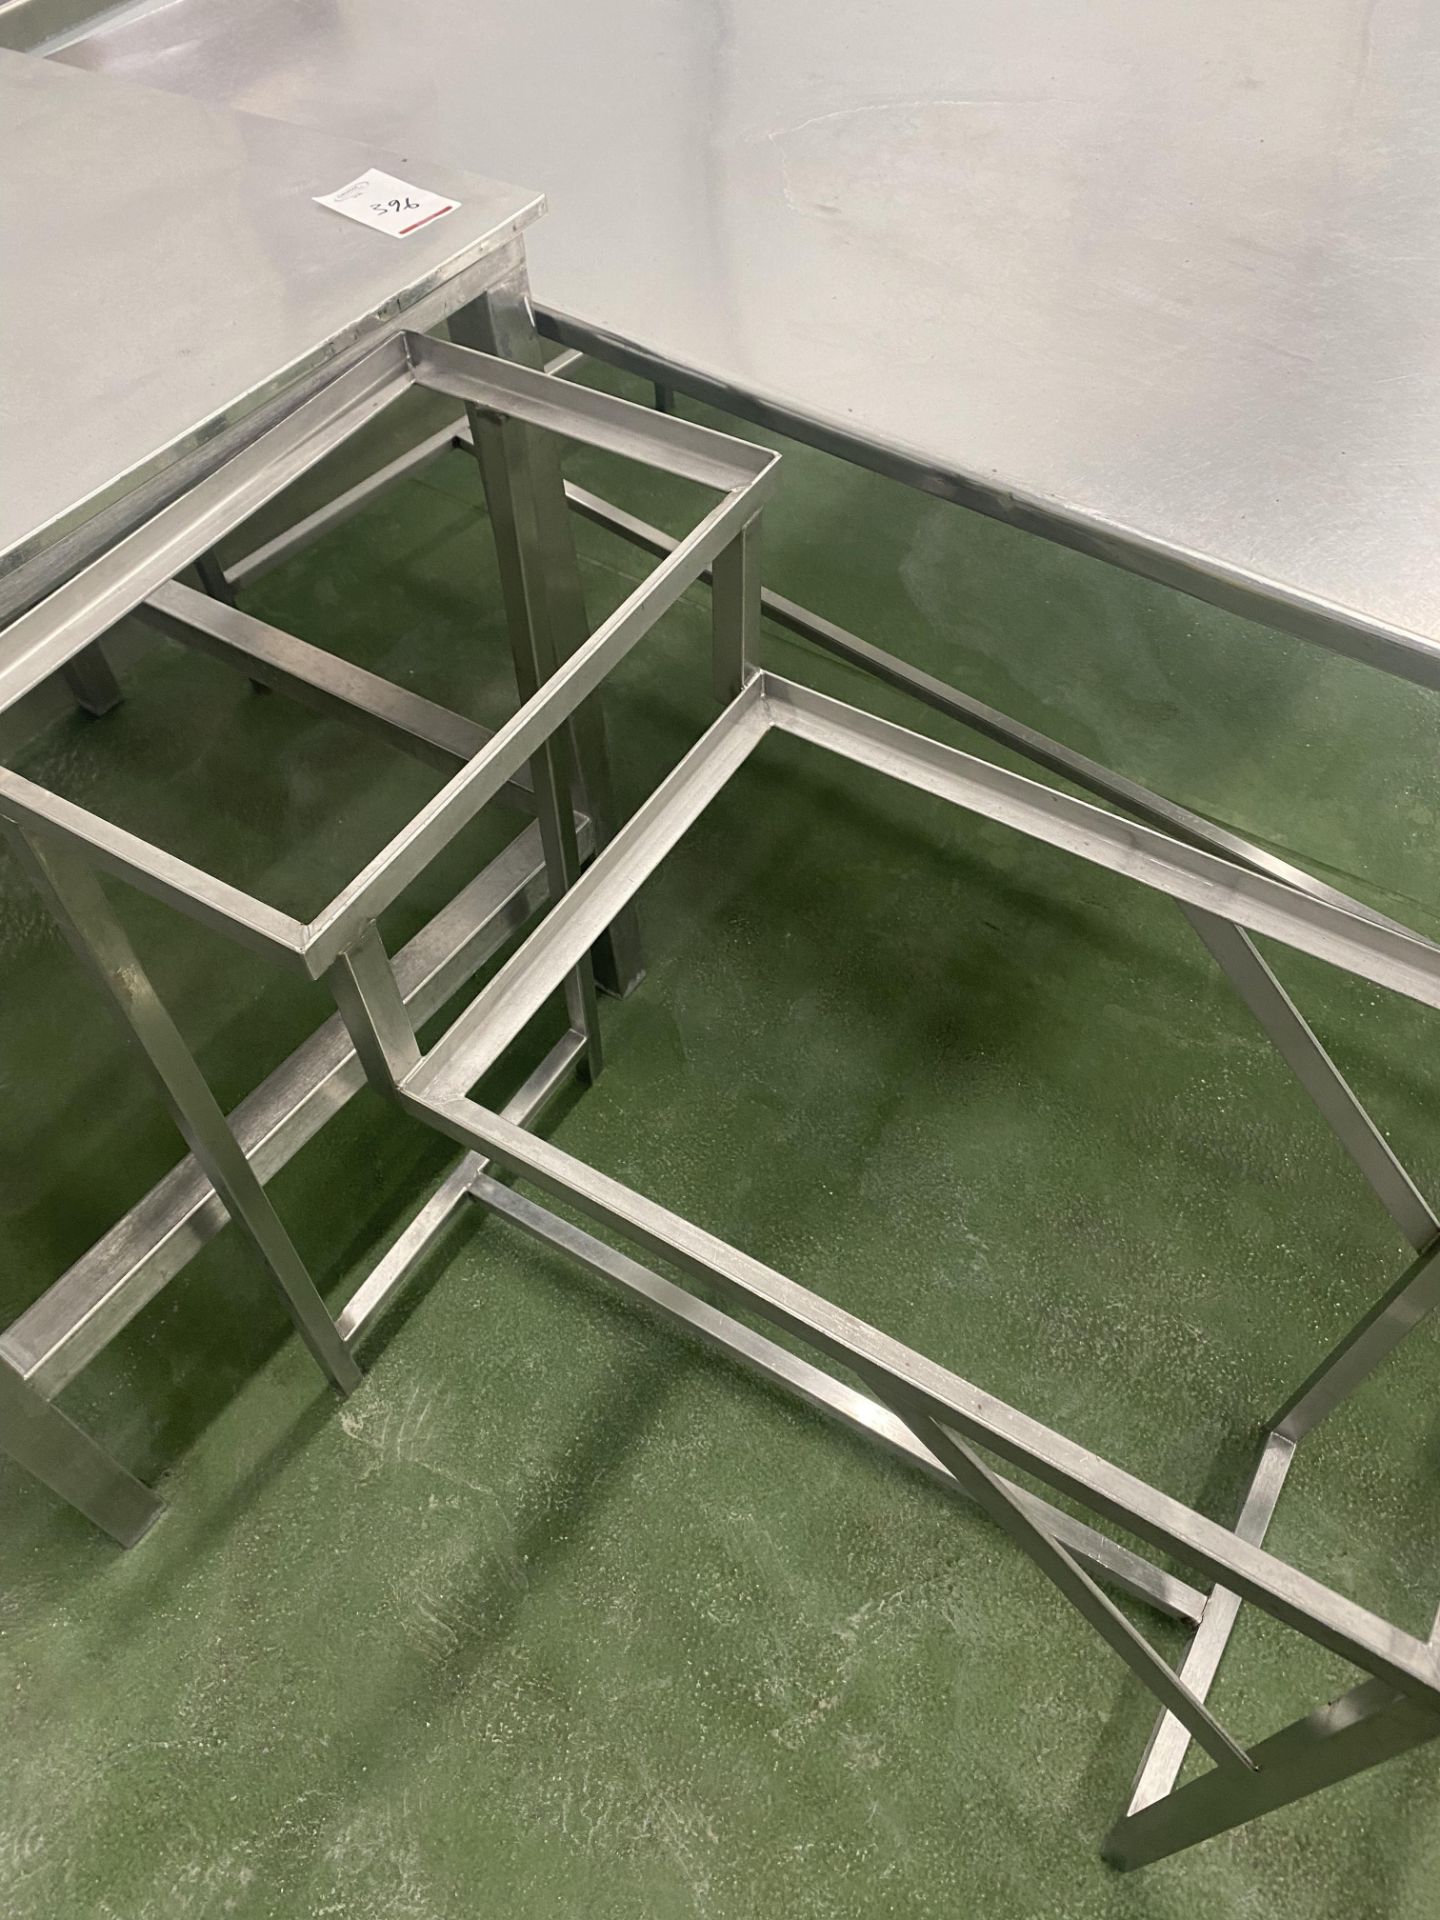 Stainless steel preparation bench , stainless steel preparation table , 3 stainless steel buckets - Image 3 of 3